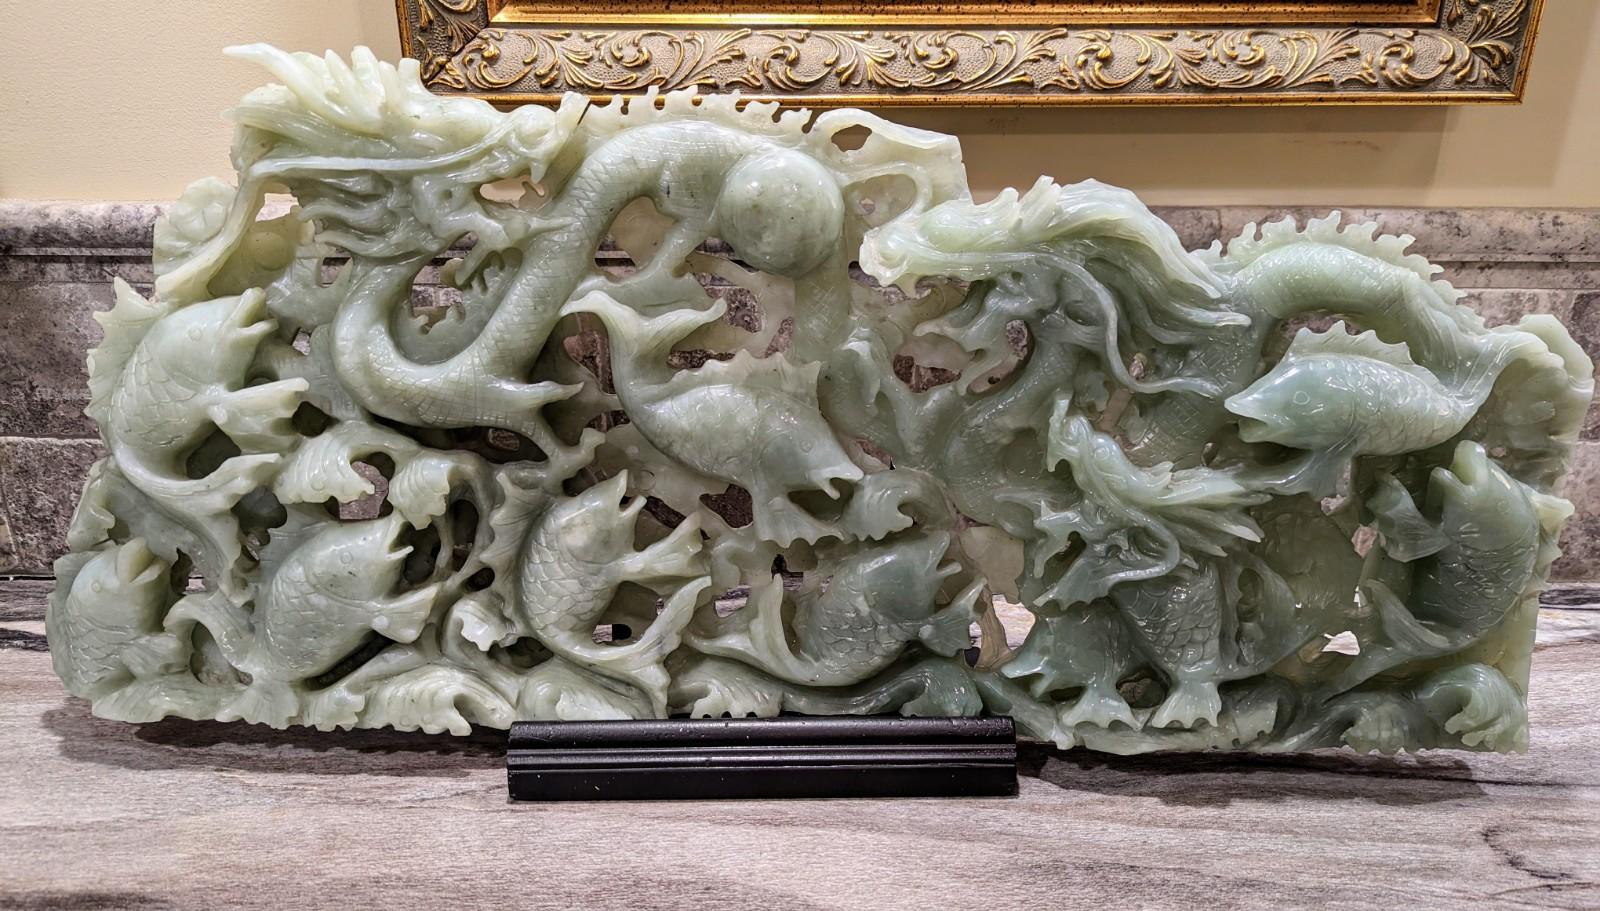 Stunning large Chinese hand carved genuine jade sculpture (tested as nephrite jade) depicting dragons and koi fish. The original owner provided details that this sculpture was created during the Qing Dynasty. We were also told that the dragons